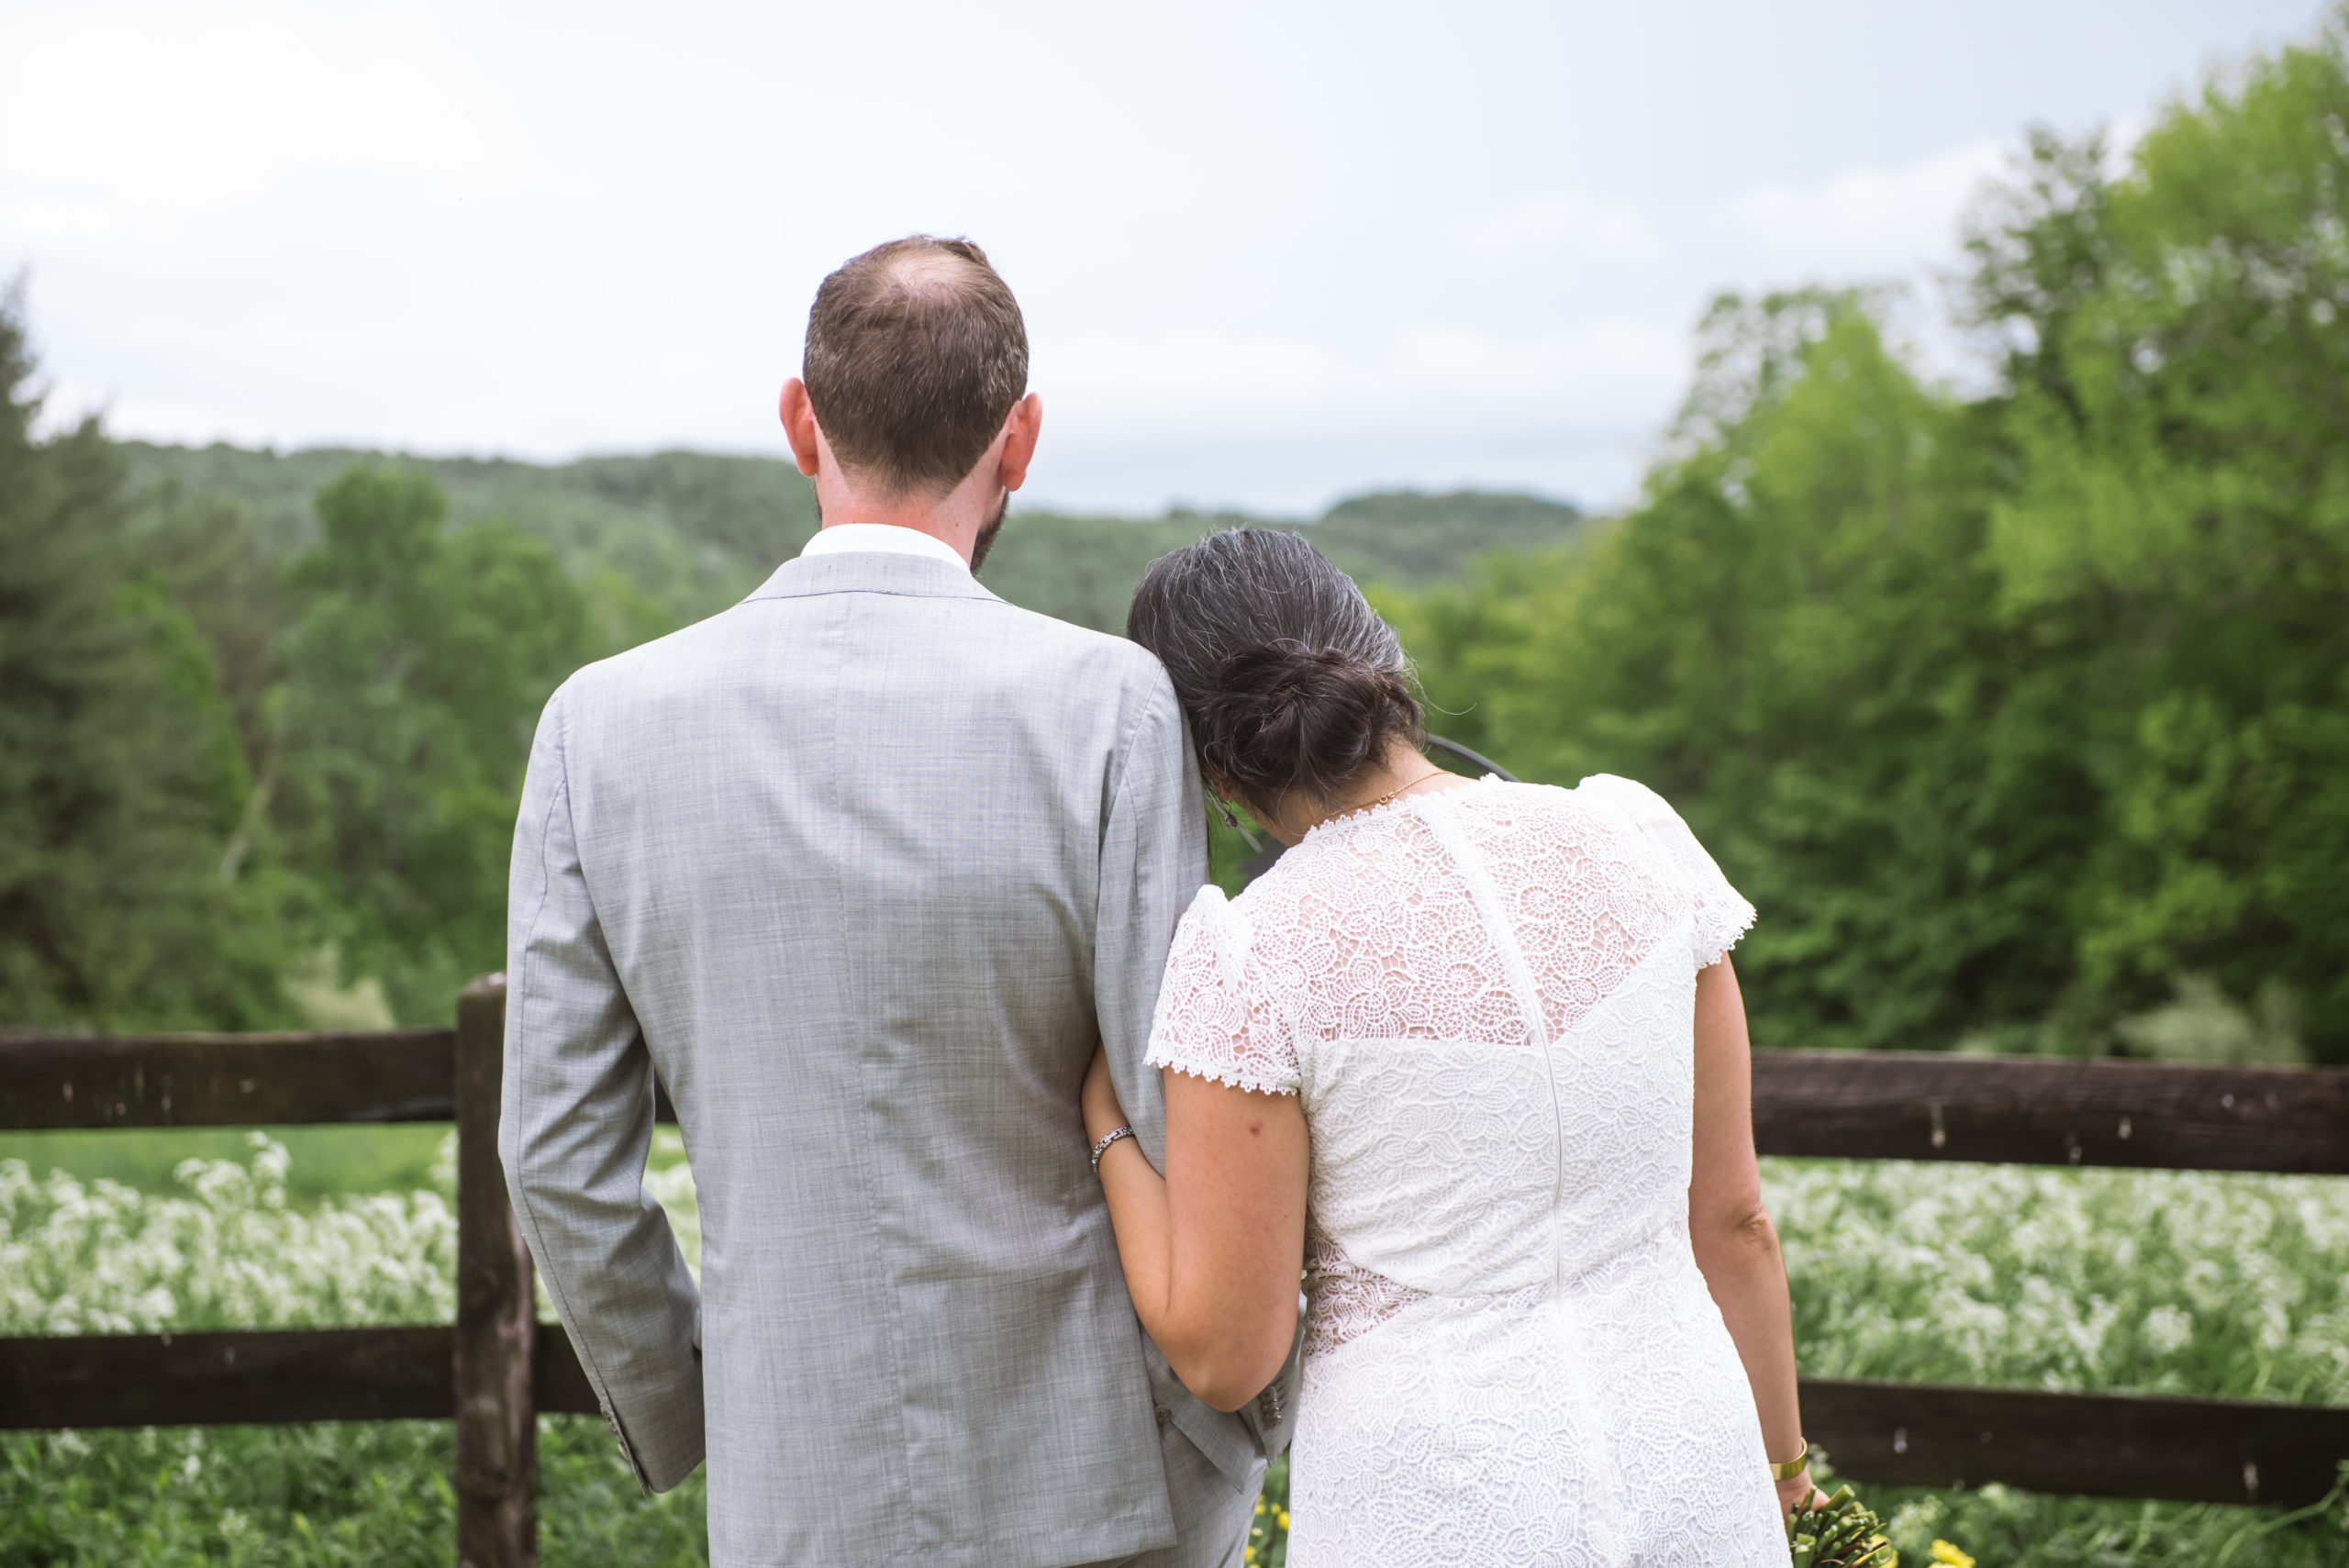 Bride and groom standing side by side with her left arm linked in his right. They are facing away from the camera, facing the mountains, trees, and flowering field in front of them. Her head is rested lightly on his right shoulder. Her bouquet stems are visible from her holding it loosely at her right side.